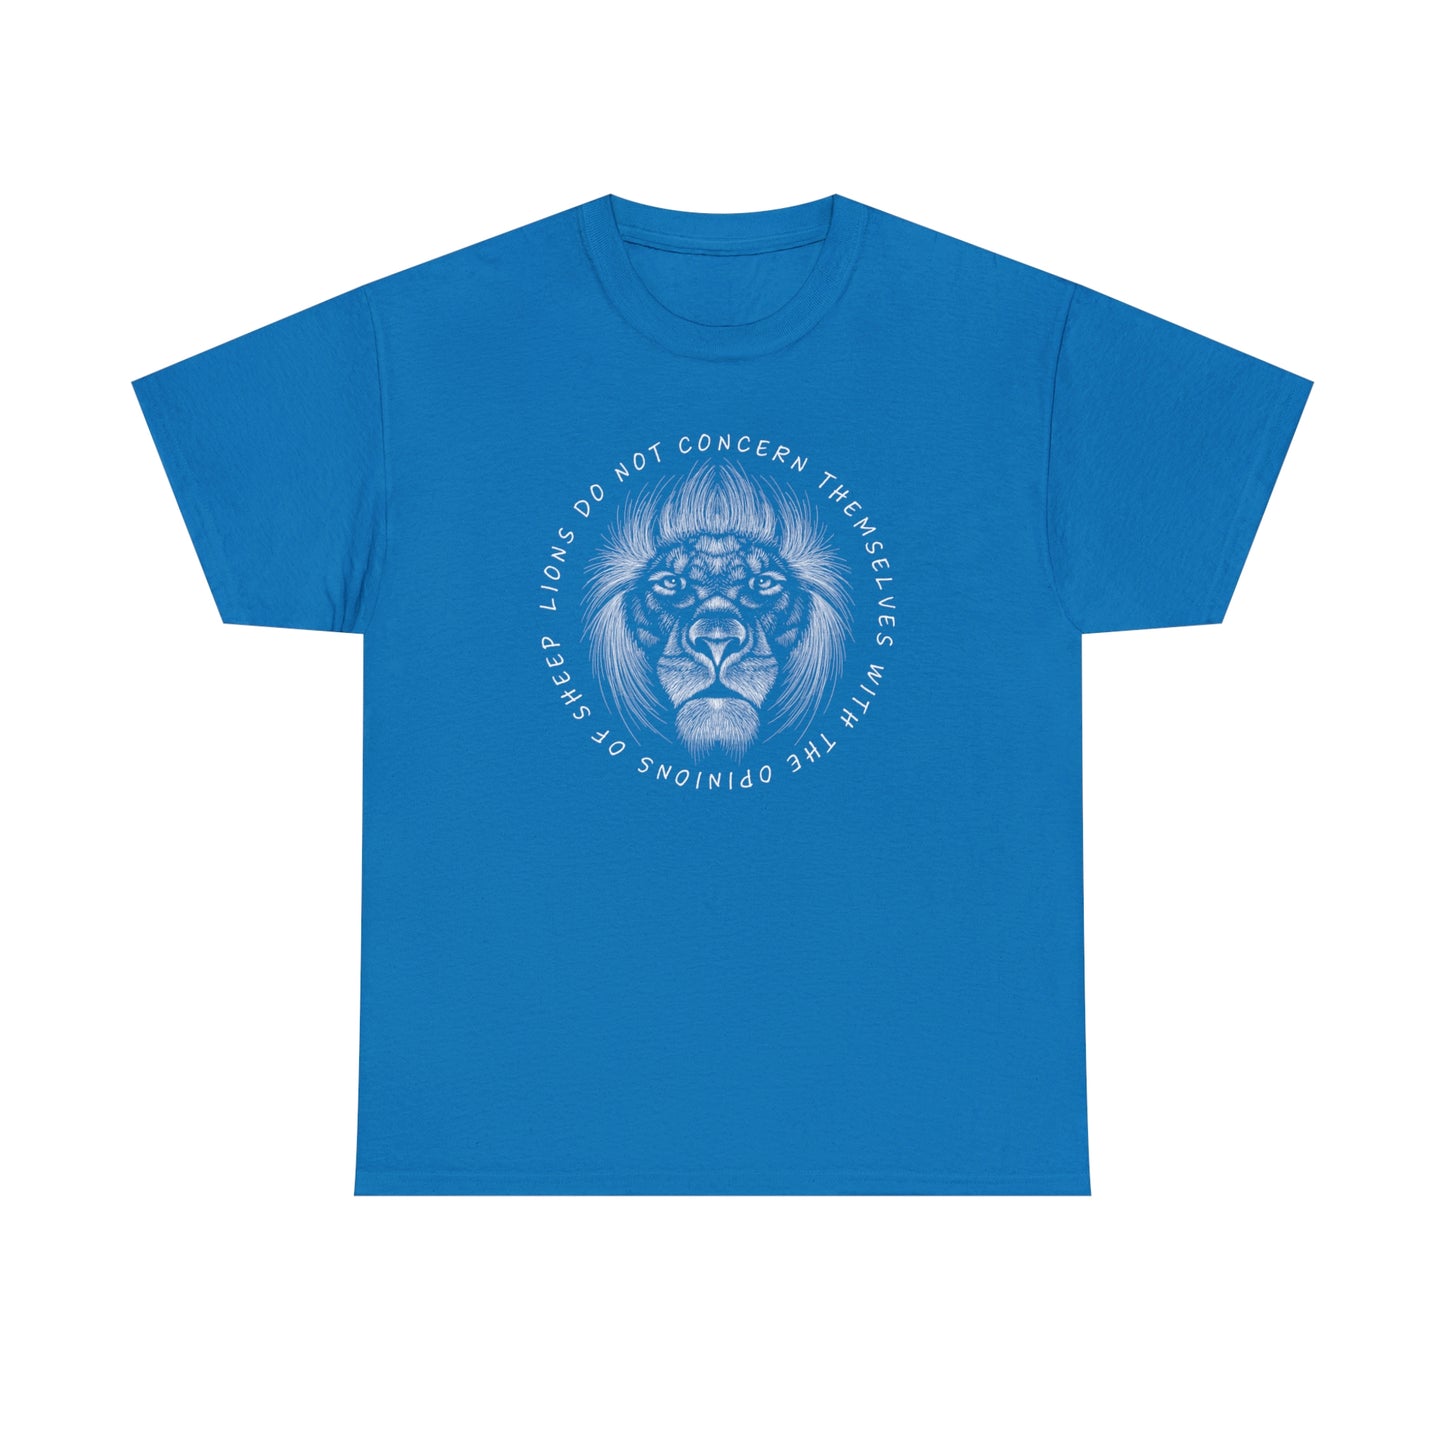 Lions Not Sheep T-Shirt For Conservative T Shirt For Patriot TShirt For MAGA Shirt For Republican TShirt For Political Gift Idea For Veteran